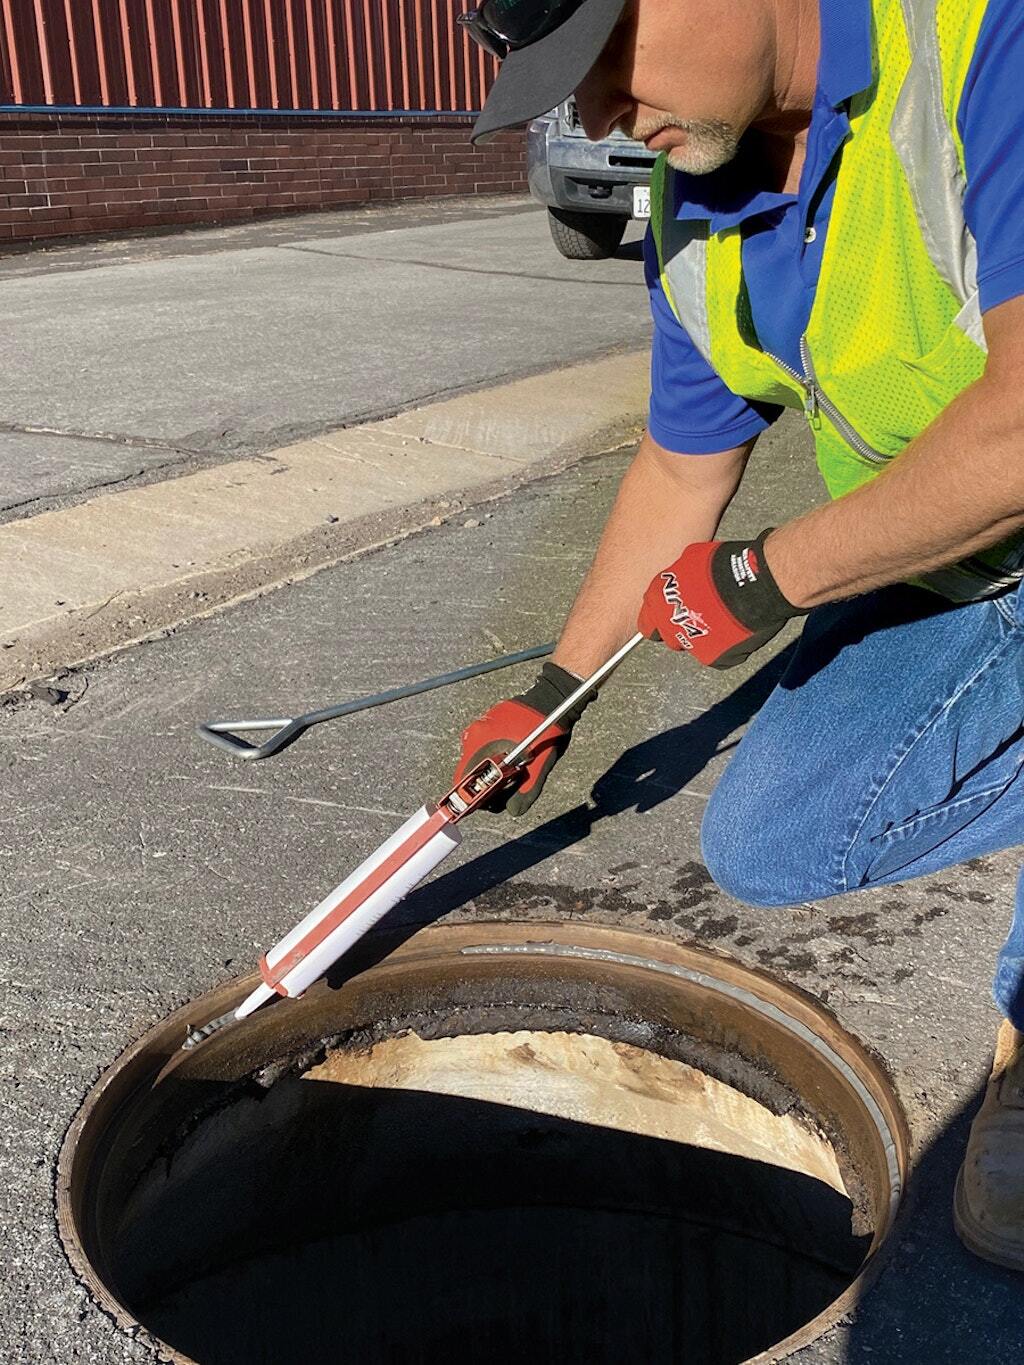 A worker with the Truckee Sanitary District uses a caulking gun to apply Hercules Shutout lubricant and sealant to a manhole lip.